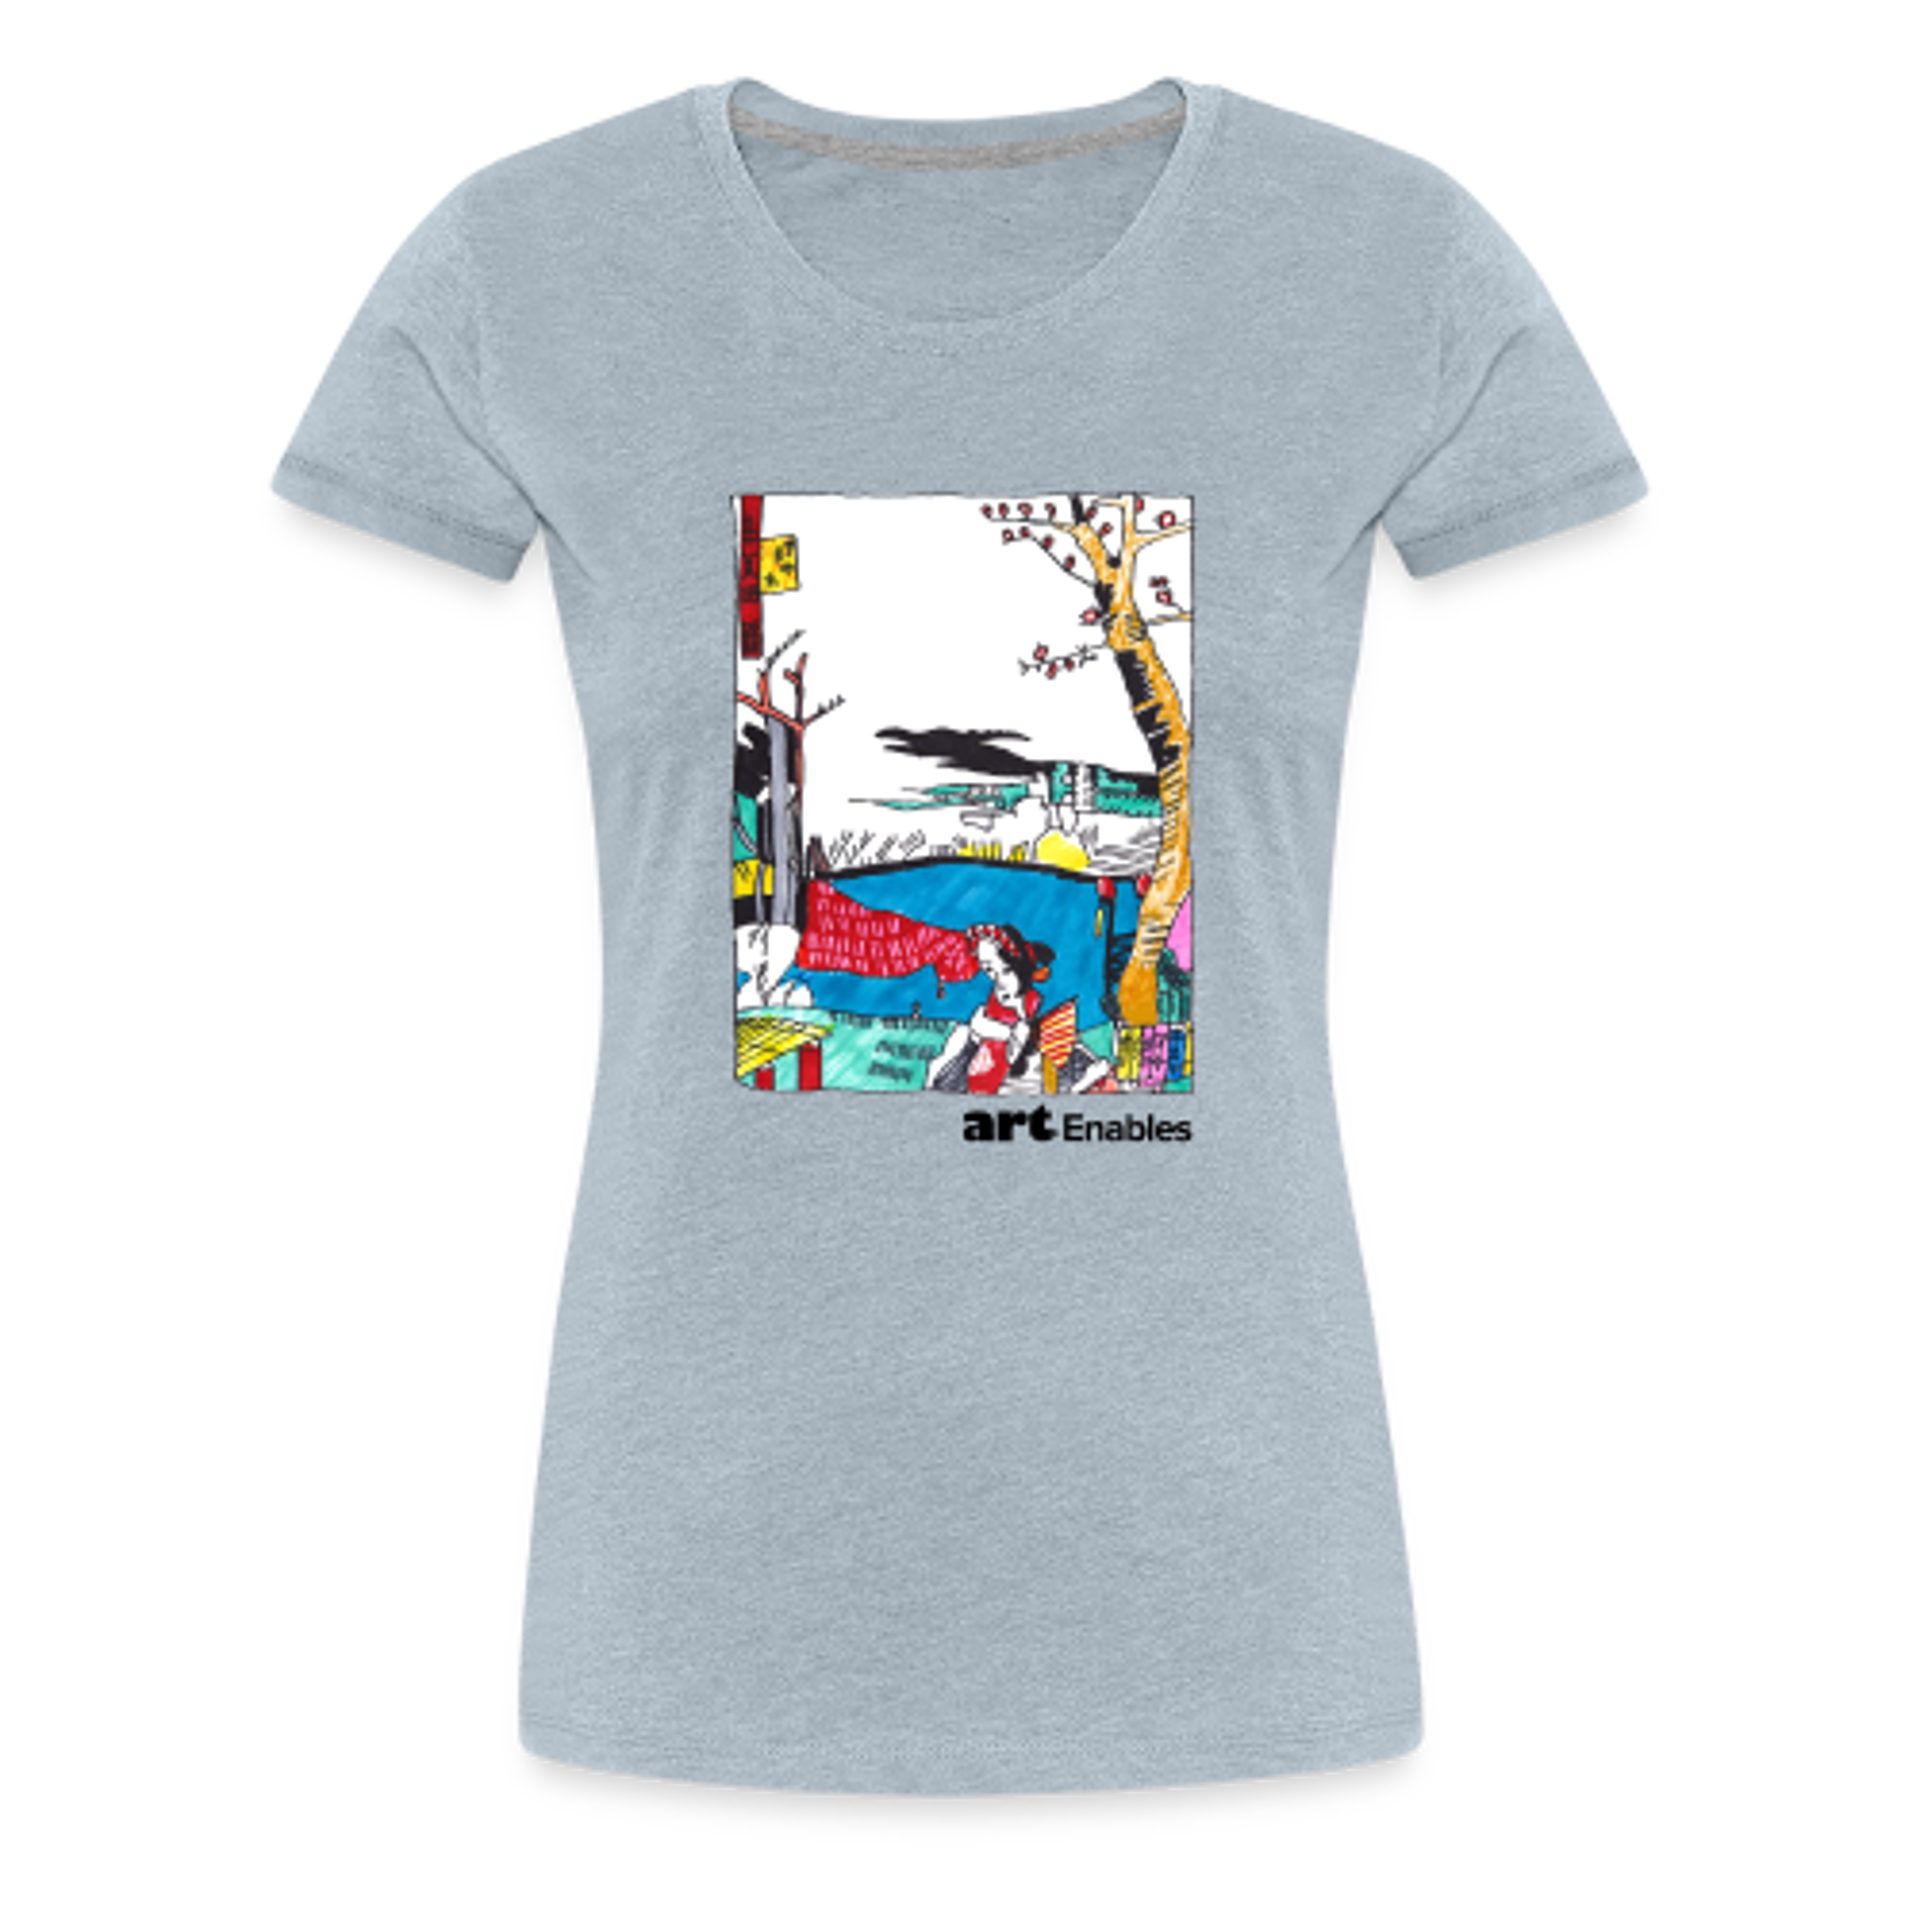 Women's T-shirt (artwork by Charles Meissner) X-Large - heather ice blue by Art Enables Merchandise